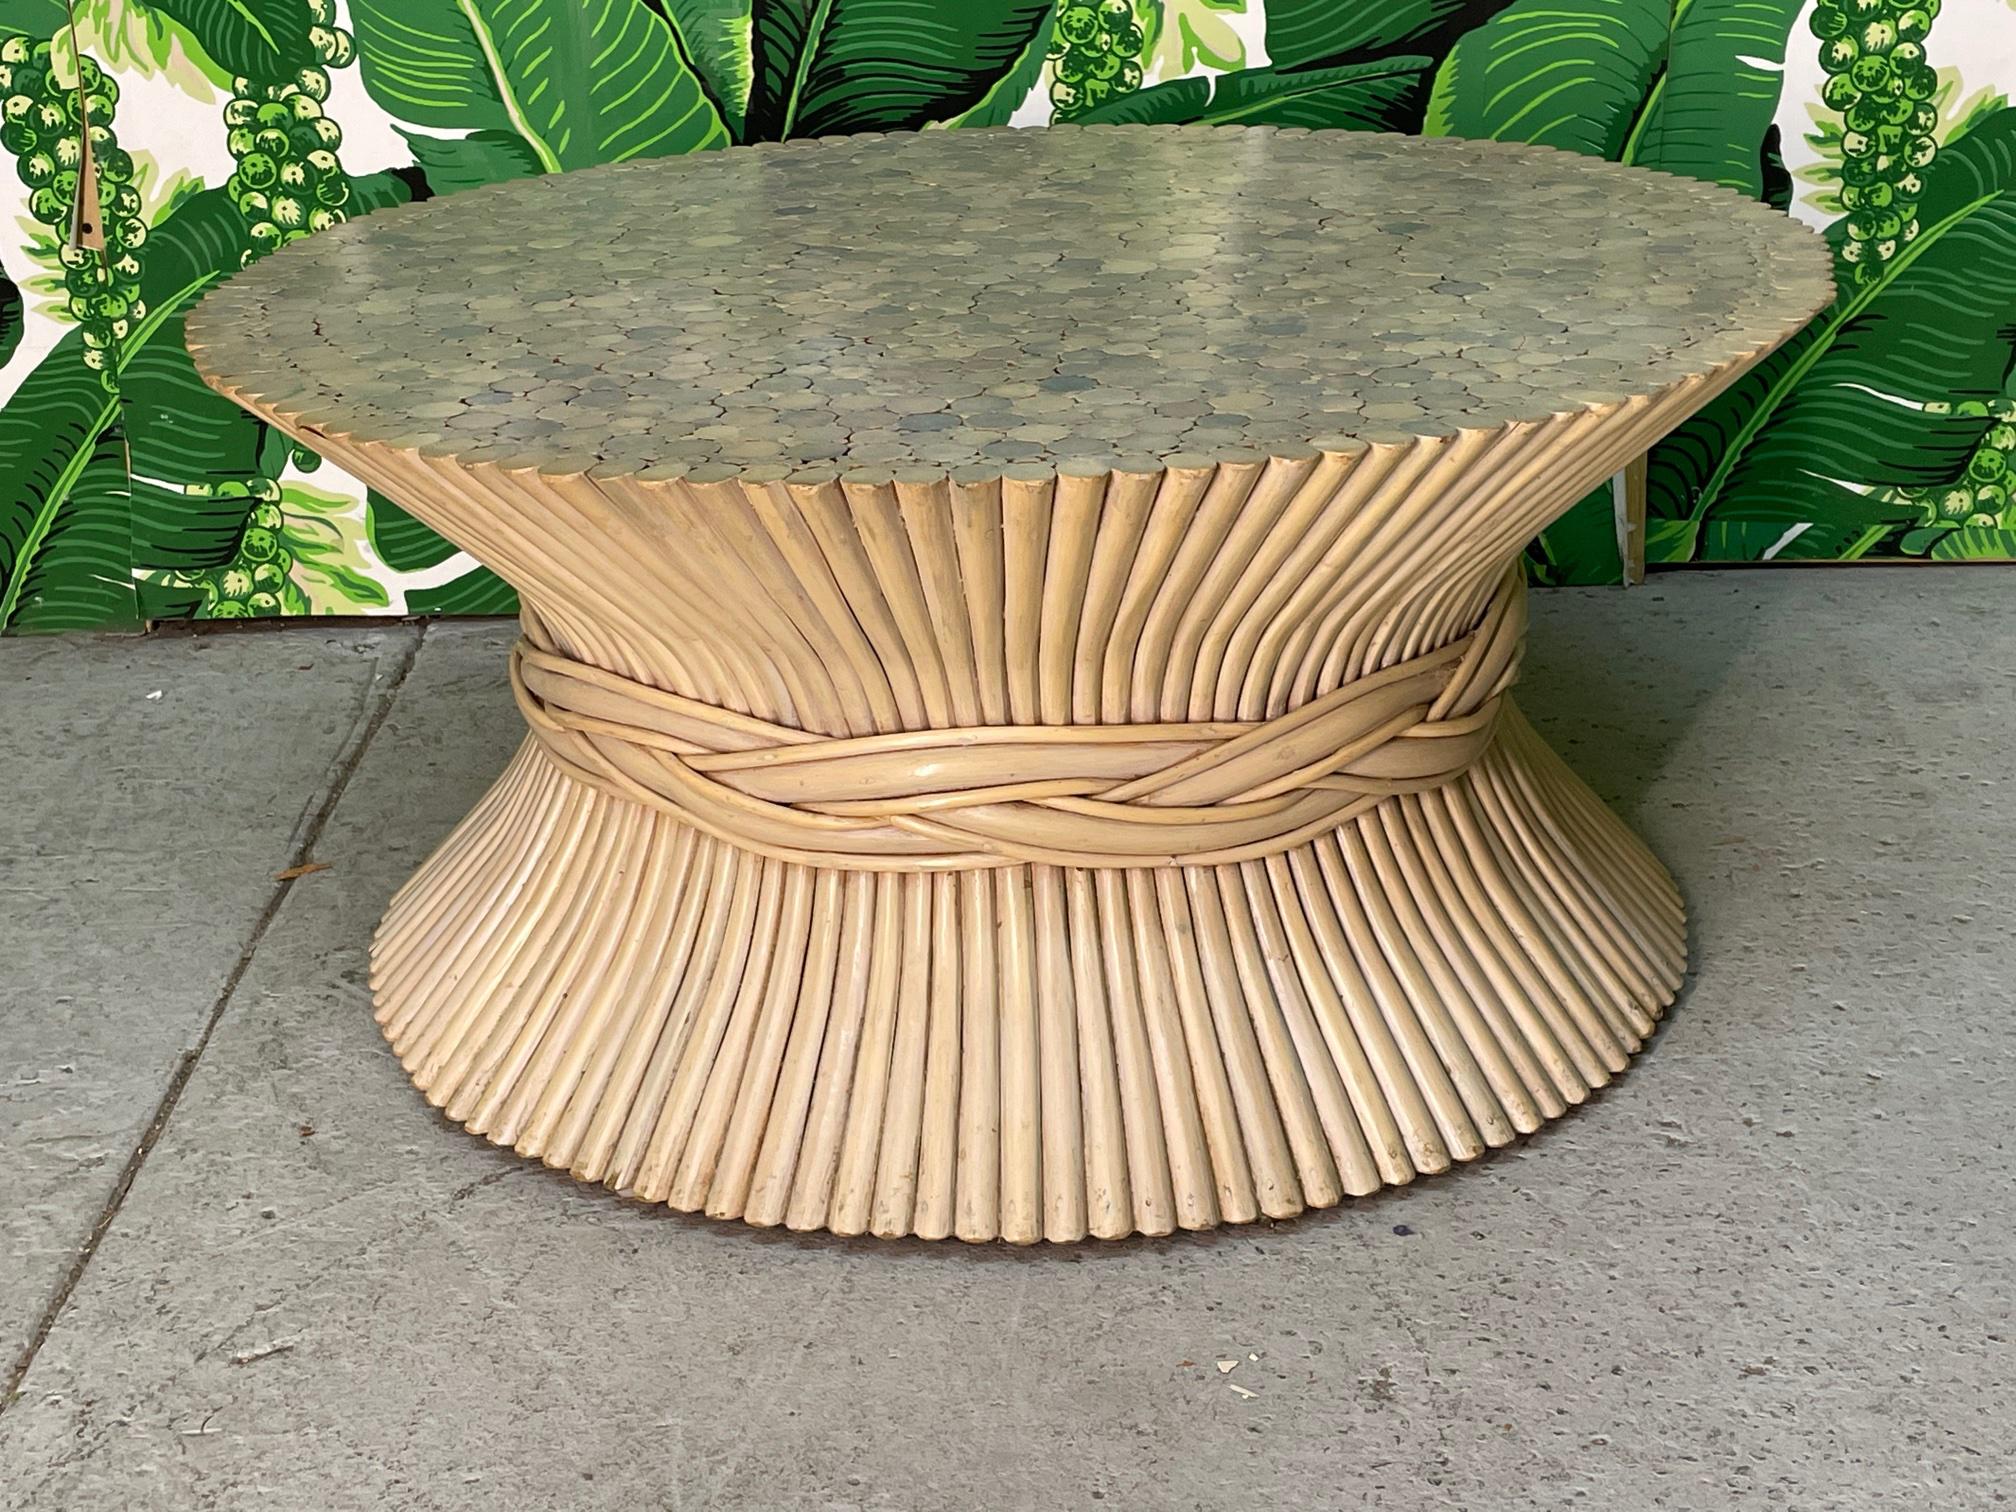 Rattan coffee or cocktail table in the iconic sheaf of wheat motif in the manner of McGuire. Good condition with imperfections consistent with age, see photos for condition details. 
For a shipping quote to your exact zip code, please message us.
